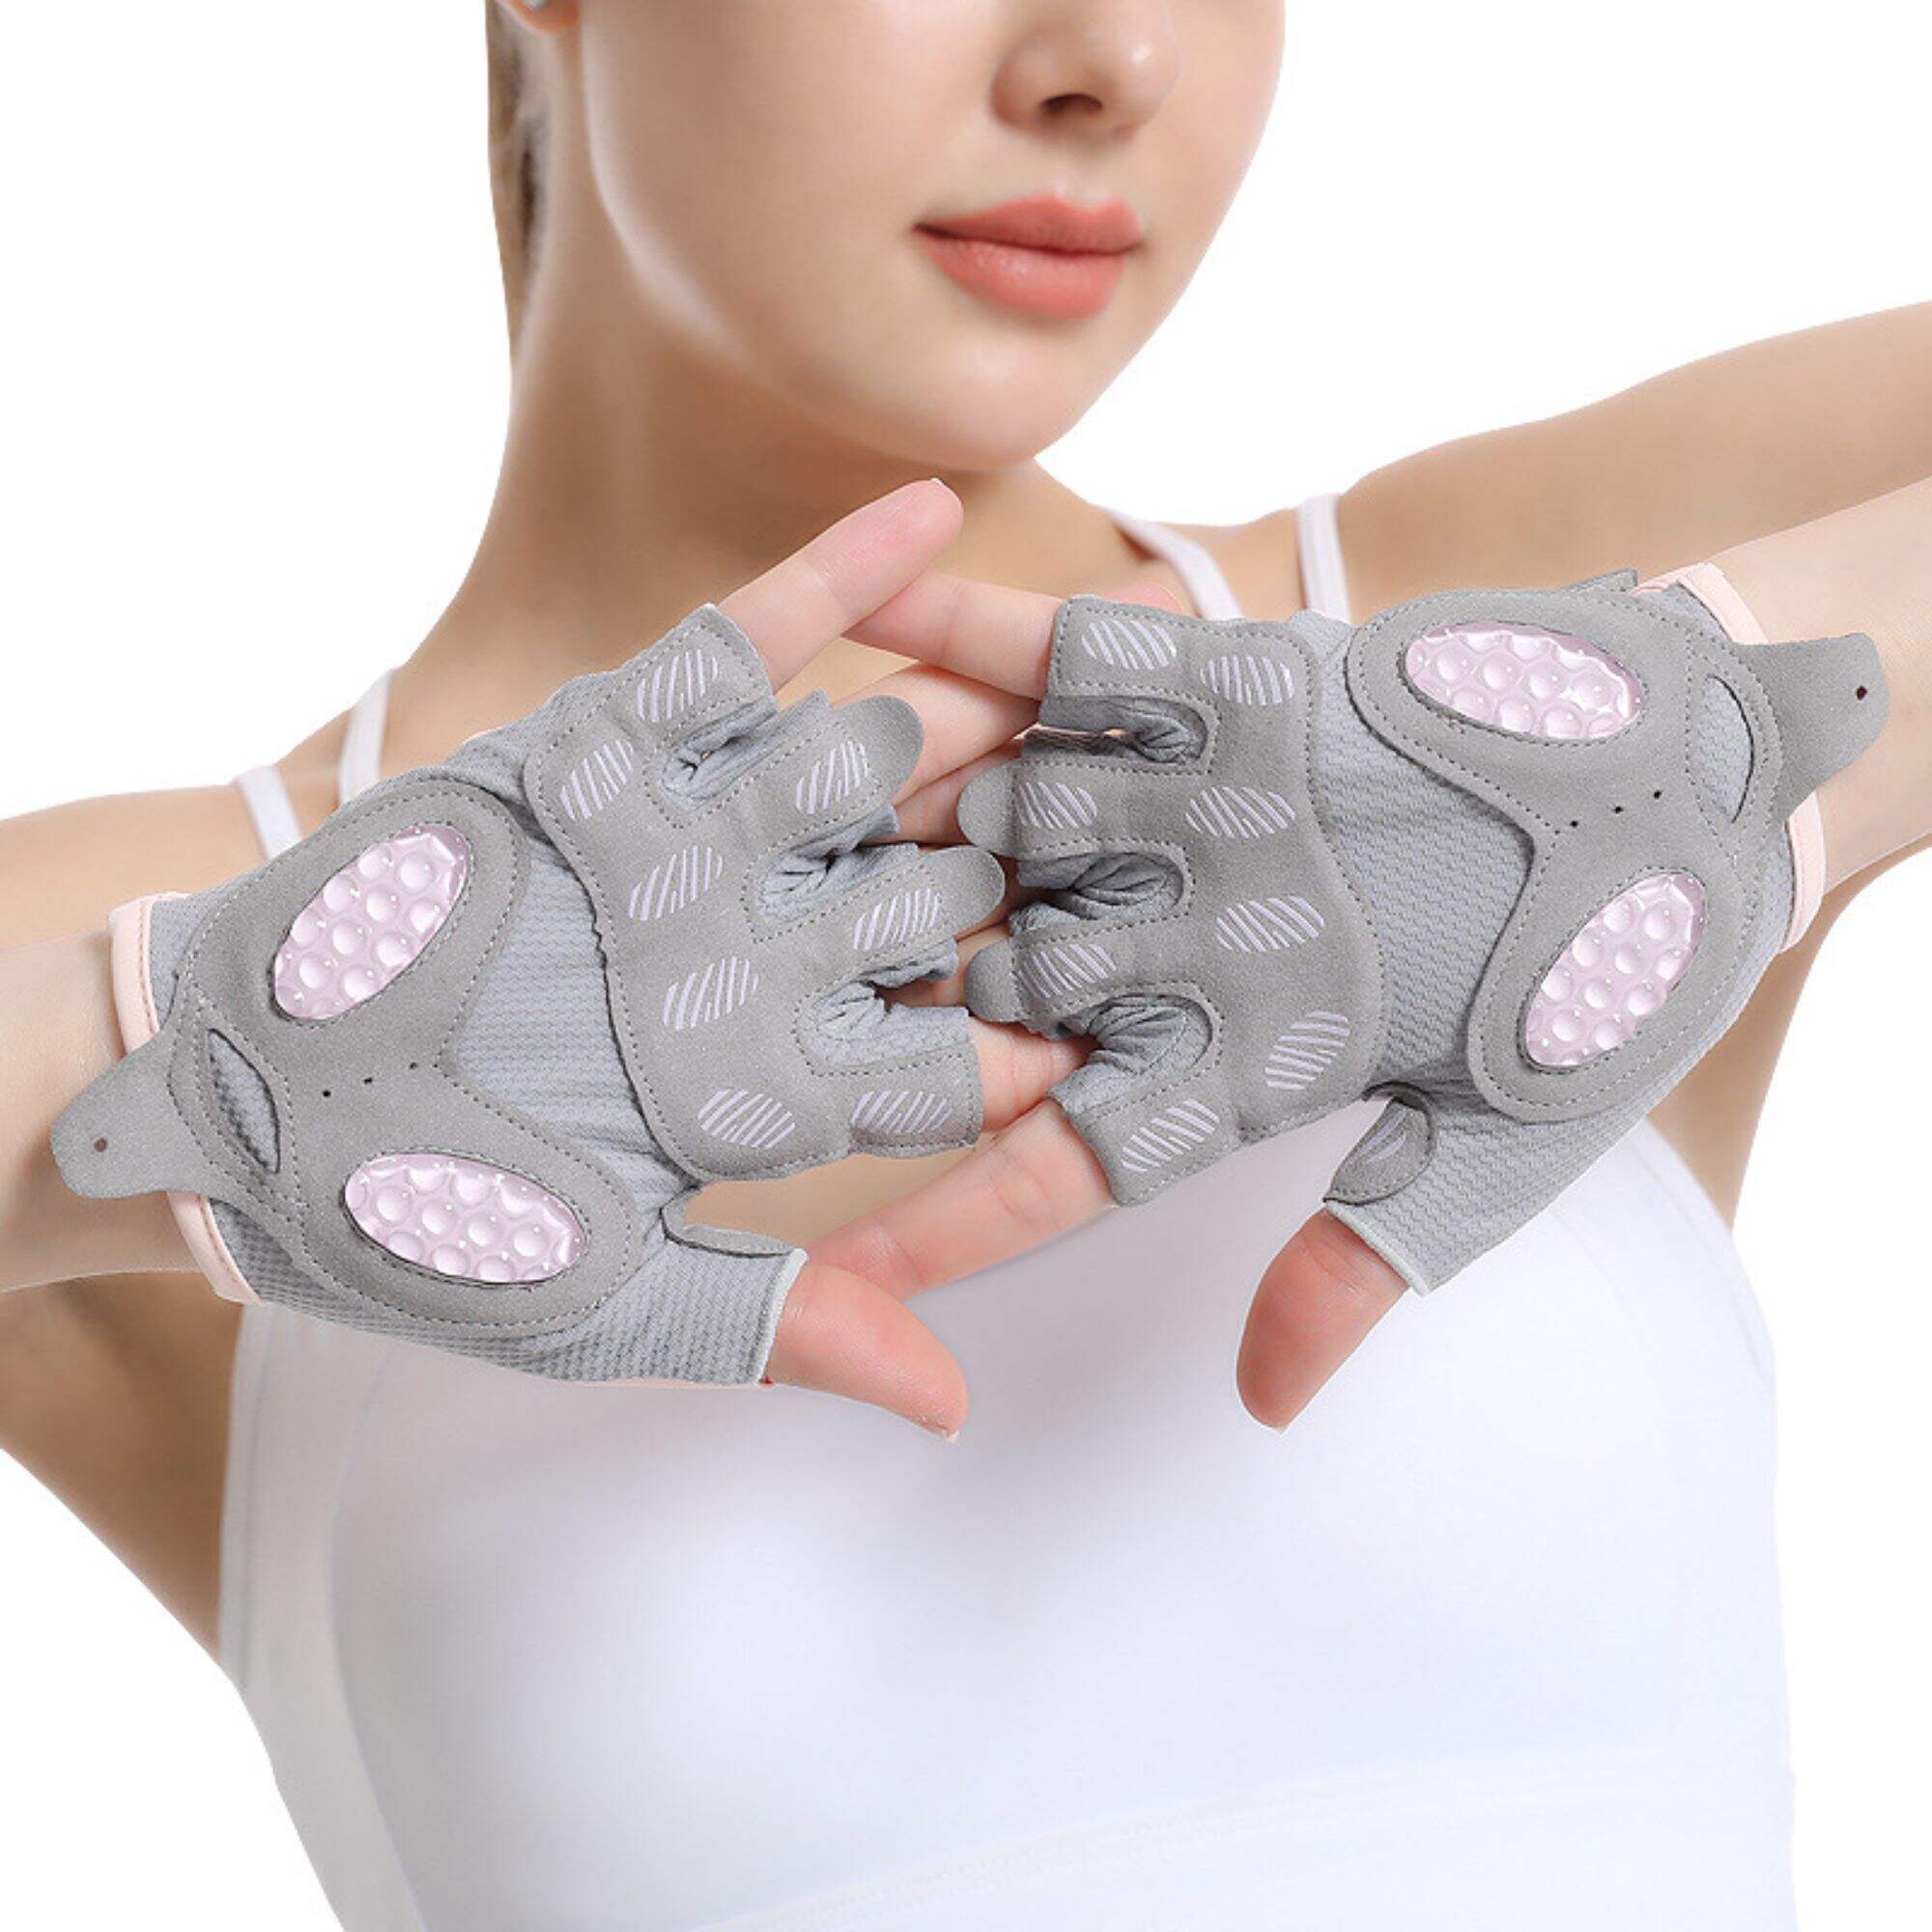 HS-121 Fitness Anti Slip Weight Lifting Gloves For Men And Women